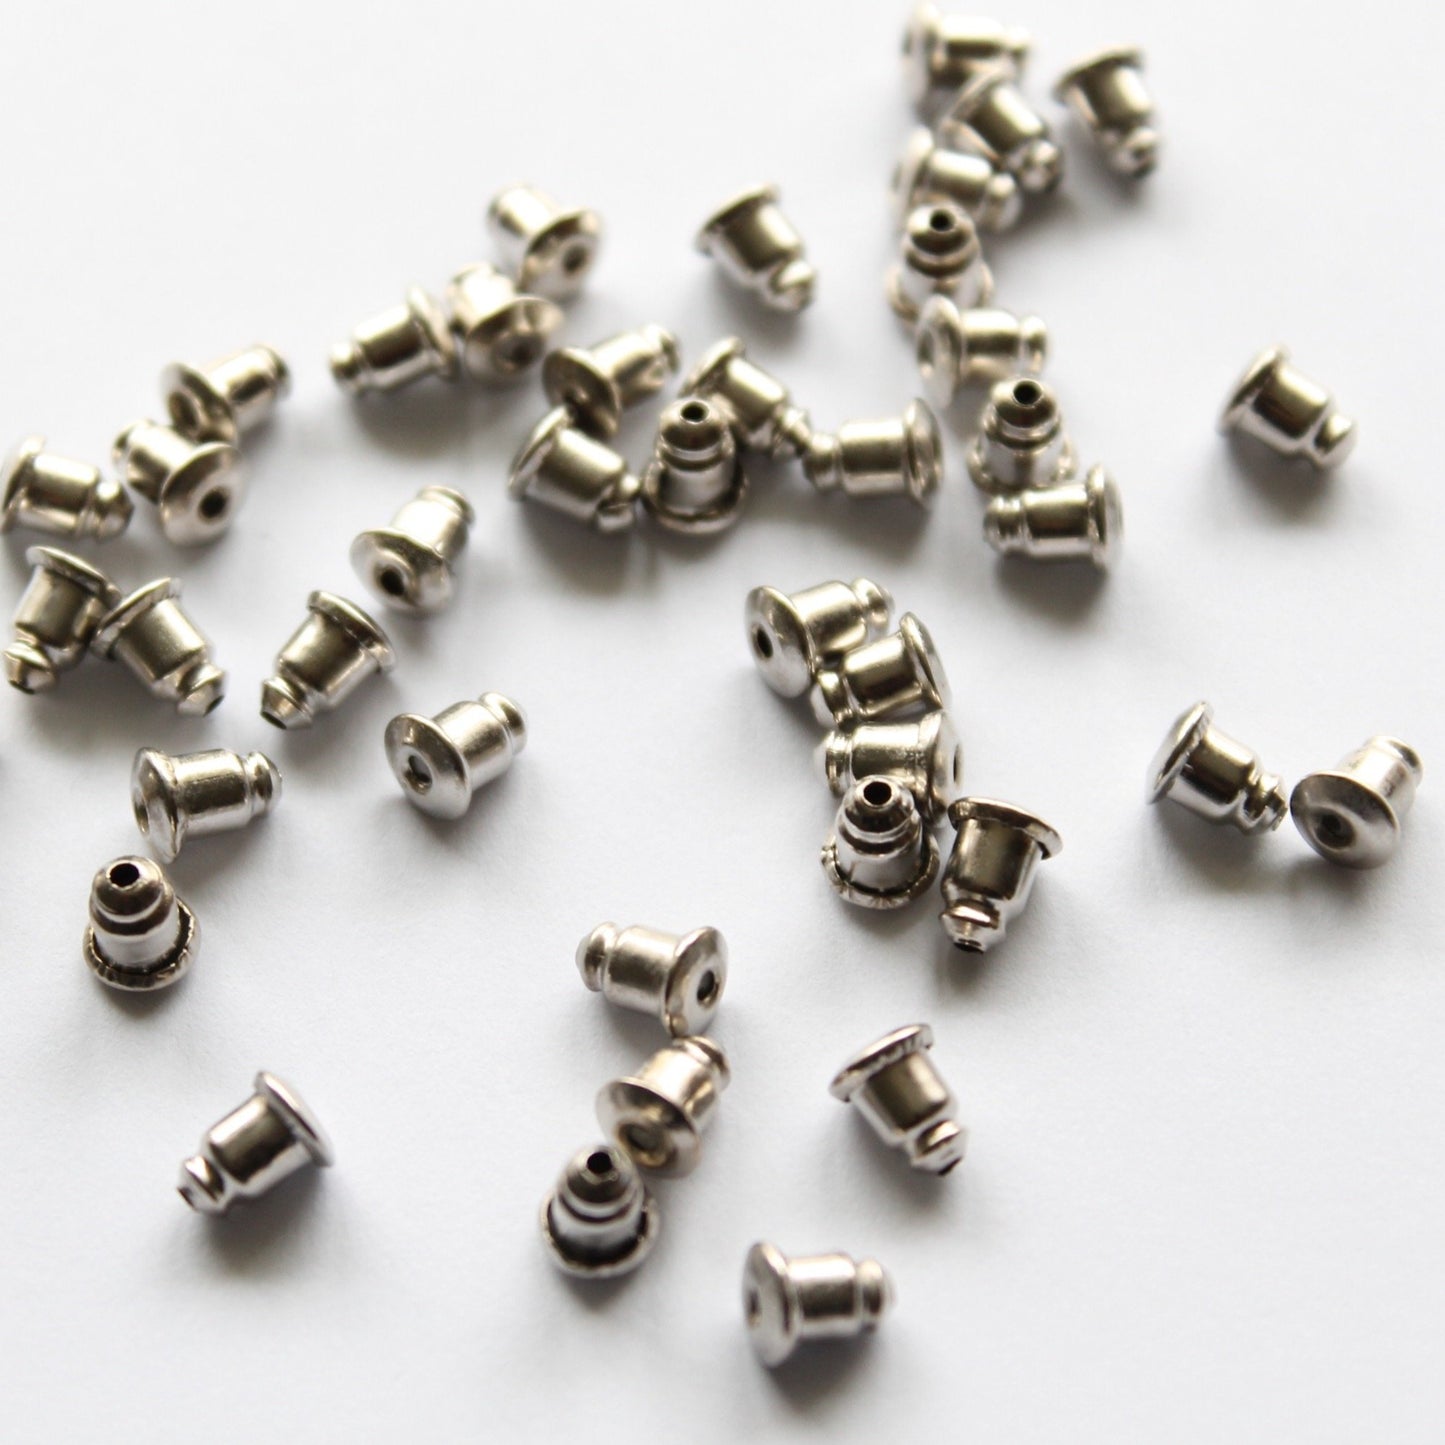 50pc Surgical Stainless Steel Earring Backs